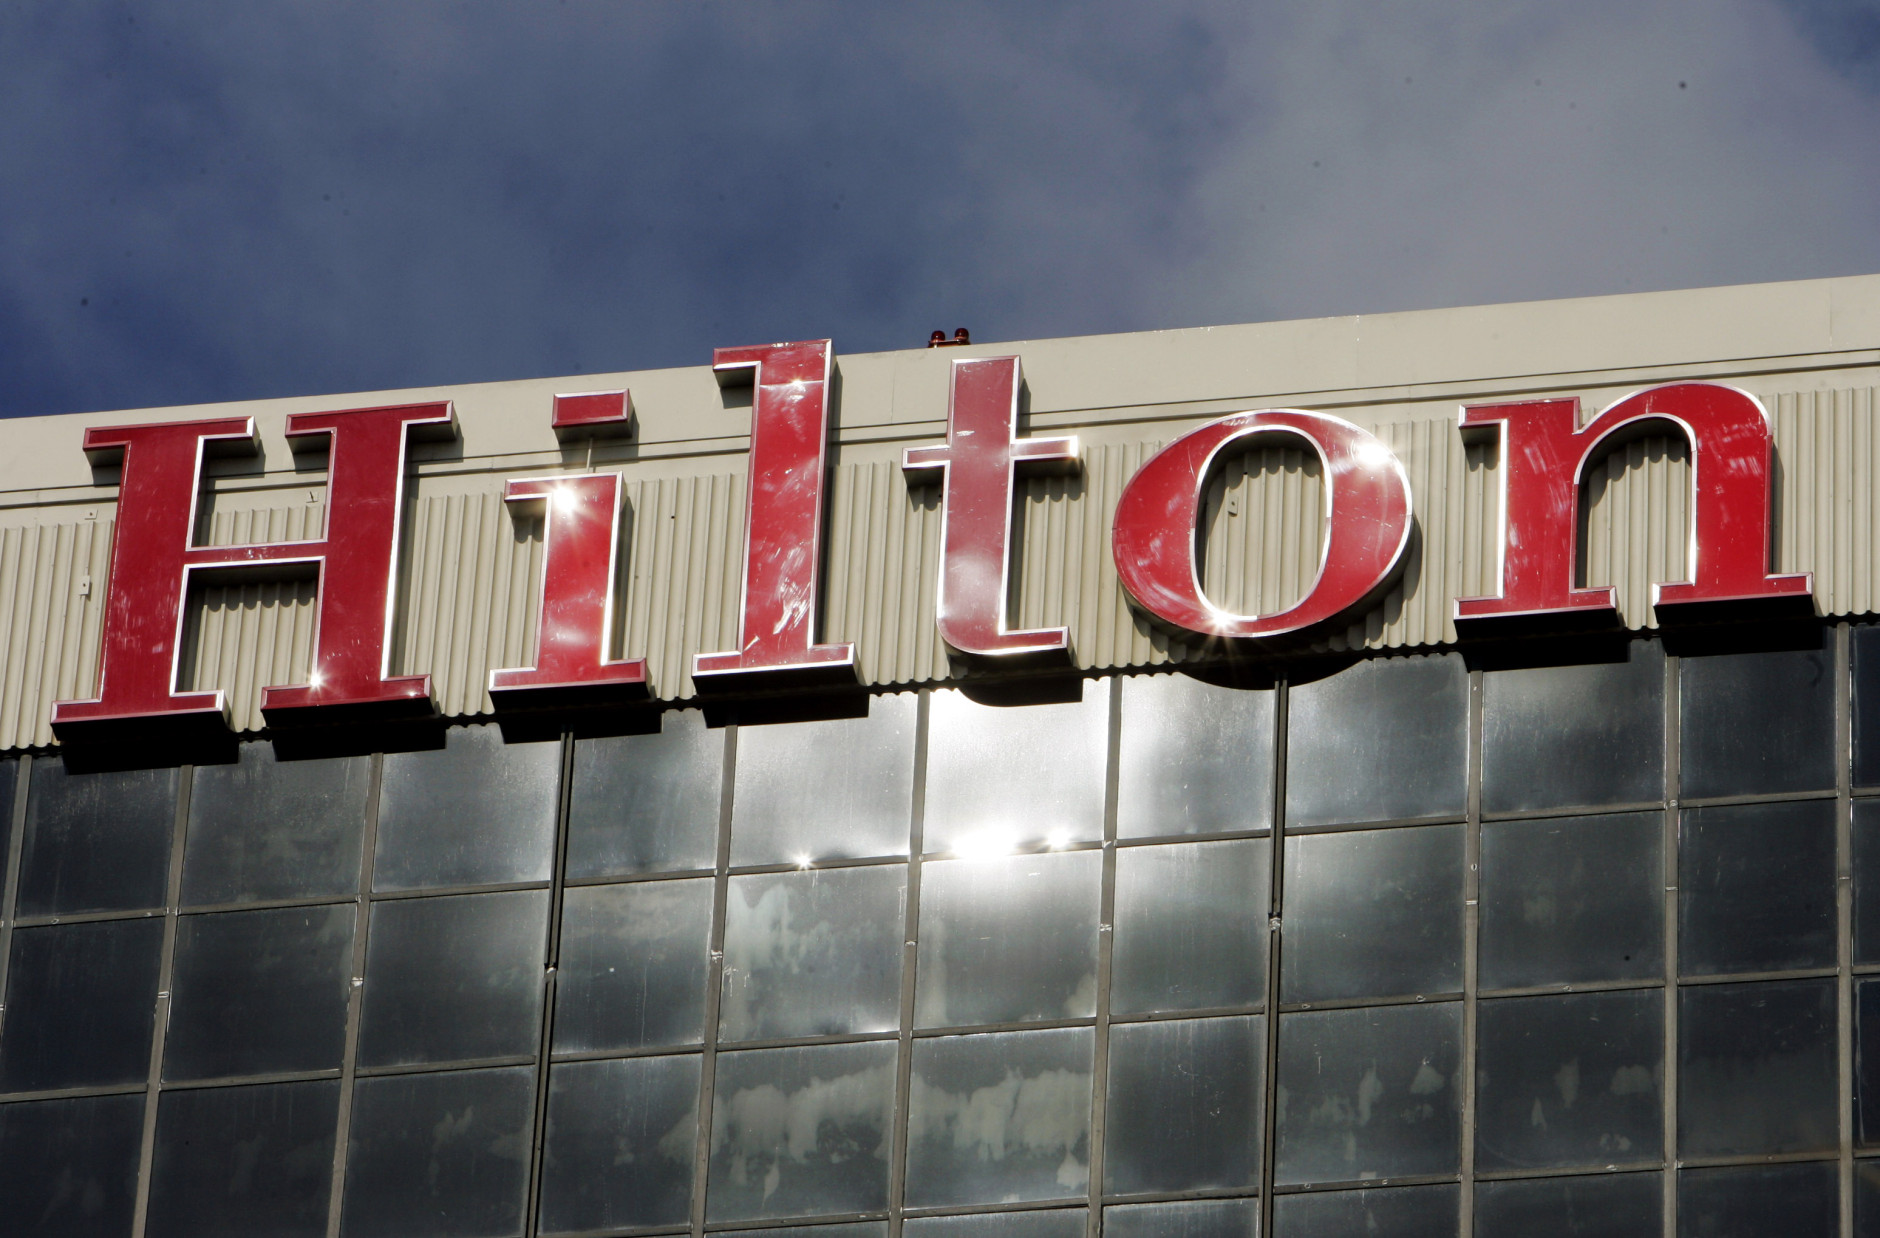 FILE - The sign atop the Hilton Los Angeles Airport hotel is seen in this Wednesday, Jan. 31, 2007 file photo. The McLean, Va. company, founded in 1919, was taken private by investment firm The Blackstone Group in October 2007. (AP Photo/Reed Saxon, File)